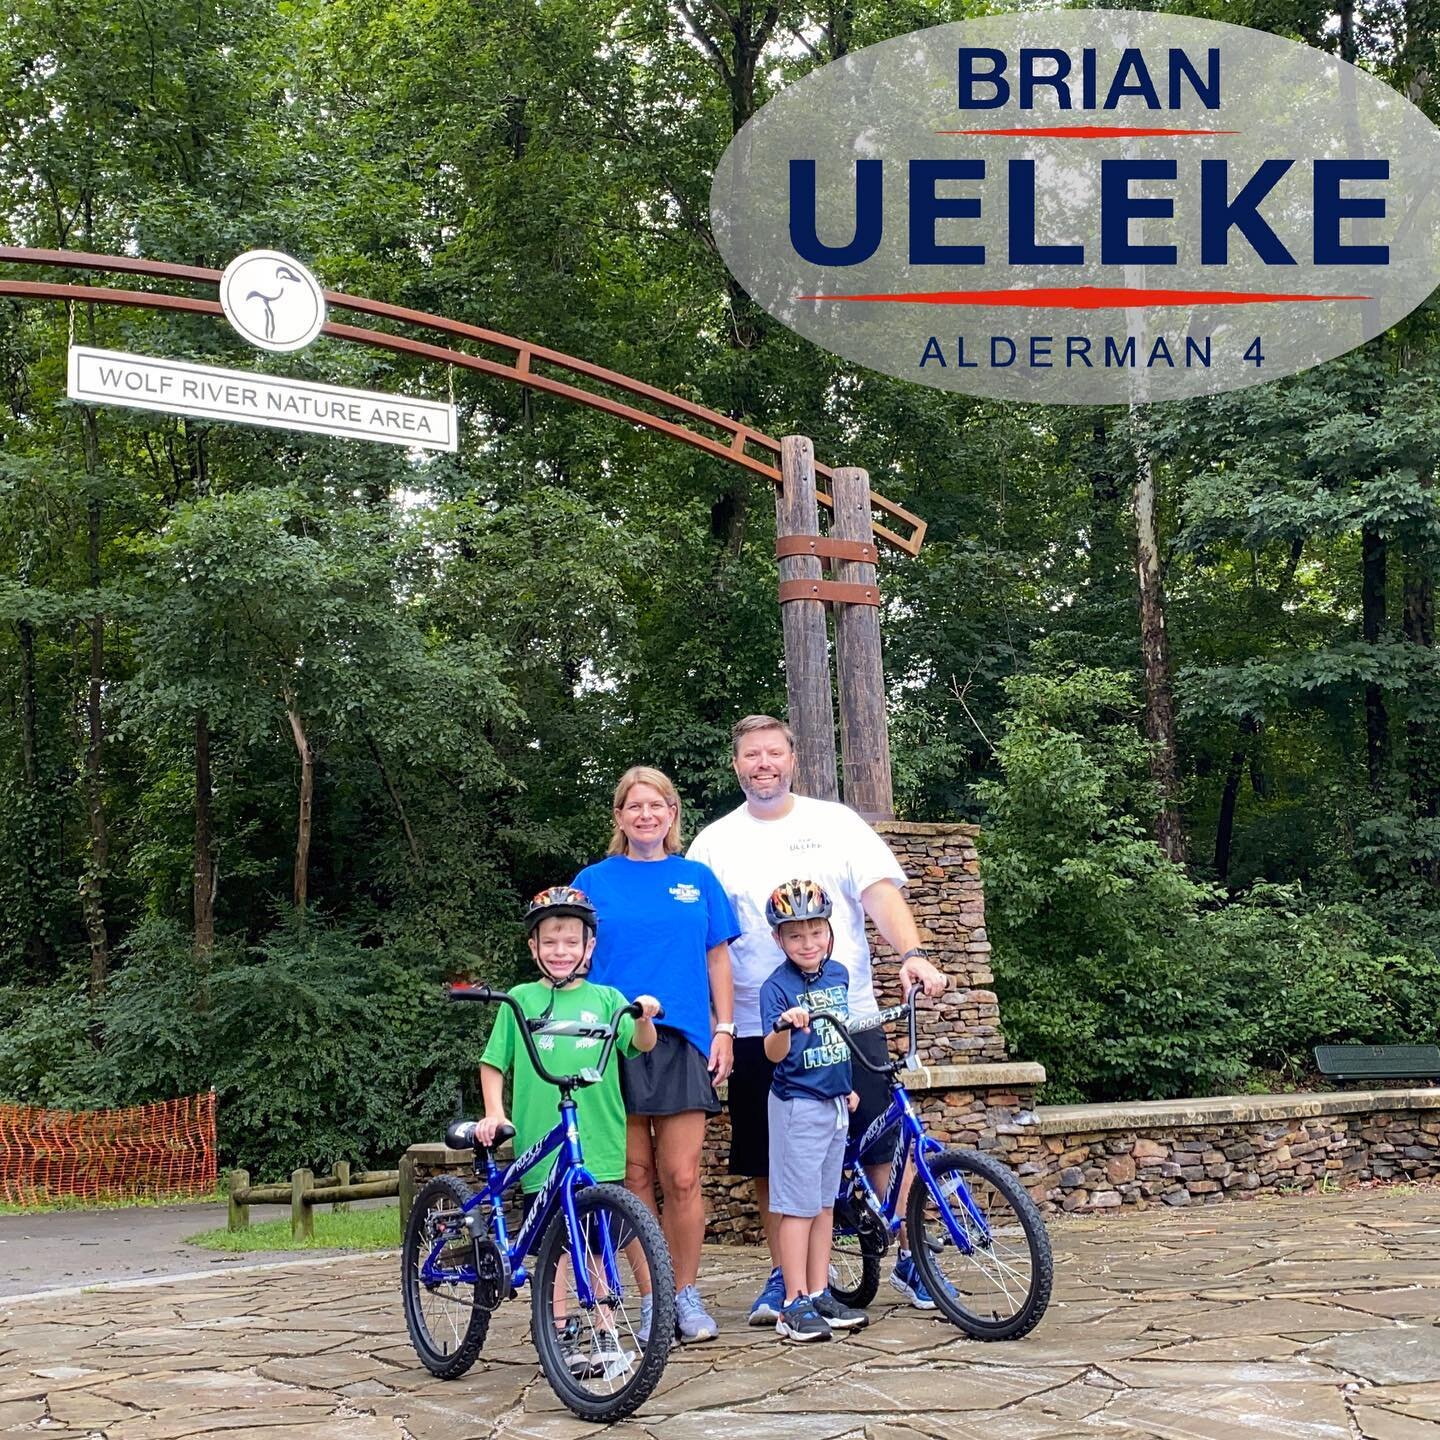 Three mile family walk/ride on the green line this morning. Just one of the many great parks in Germantown! -Brian